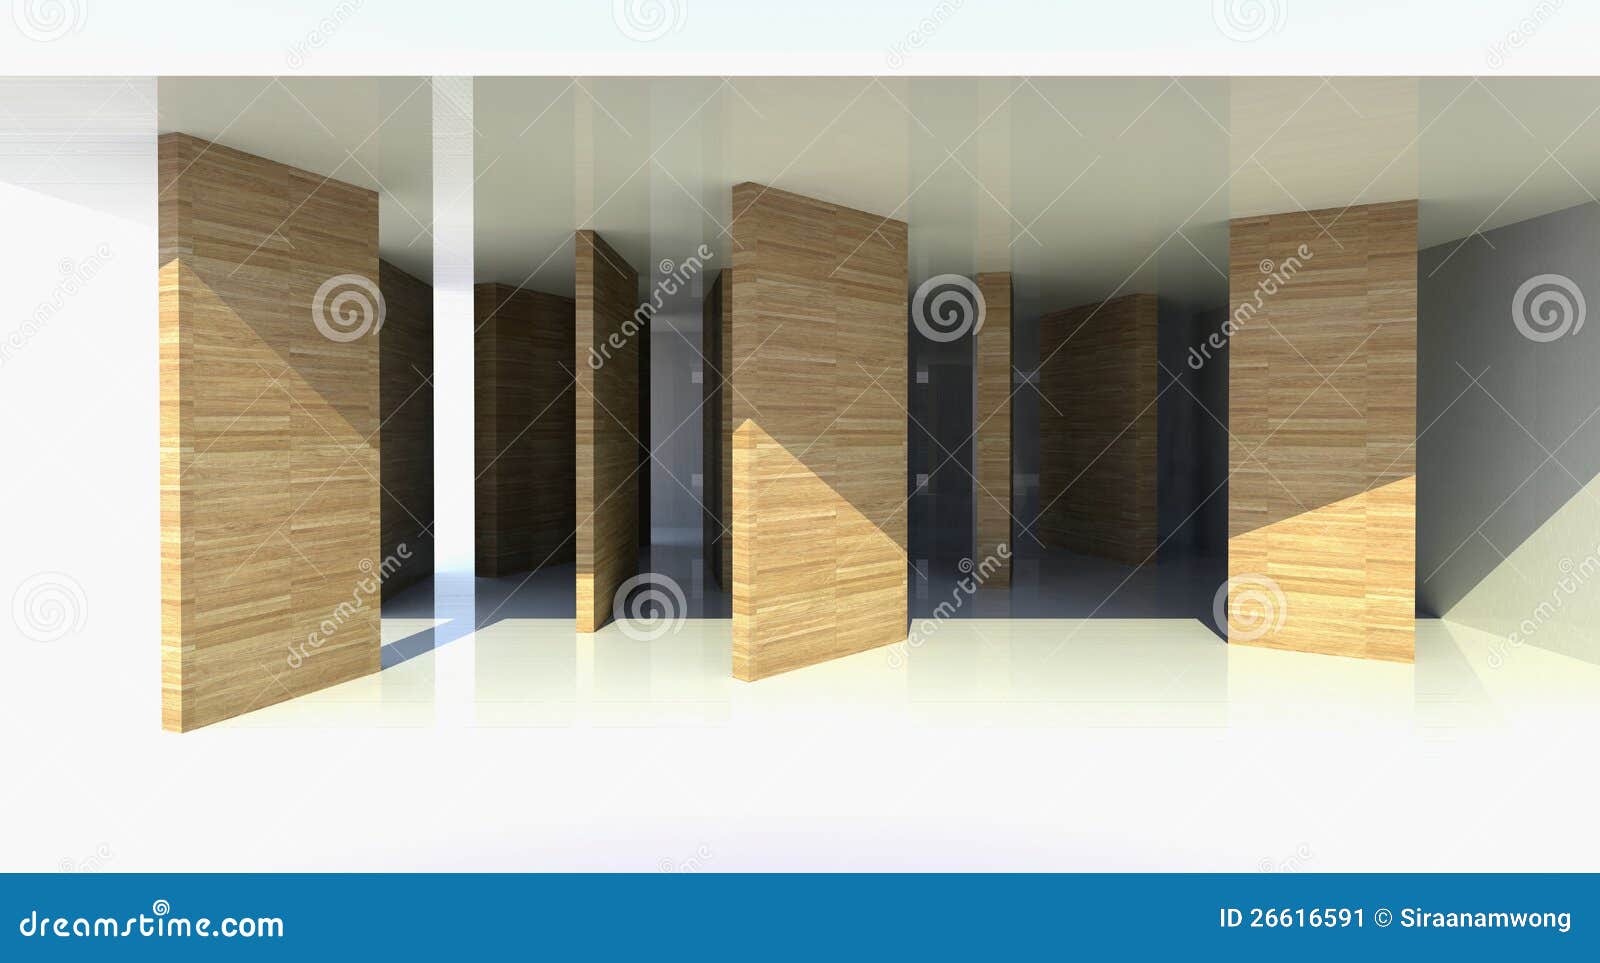 room with wood partition, abstract architecture